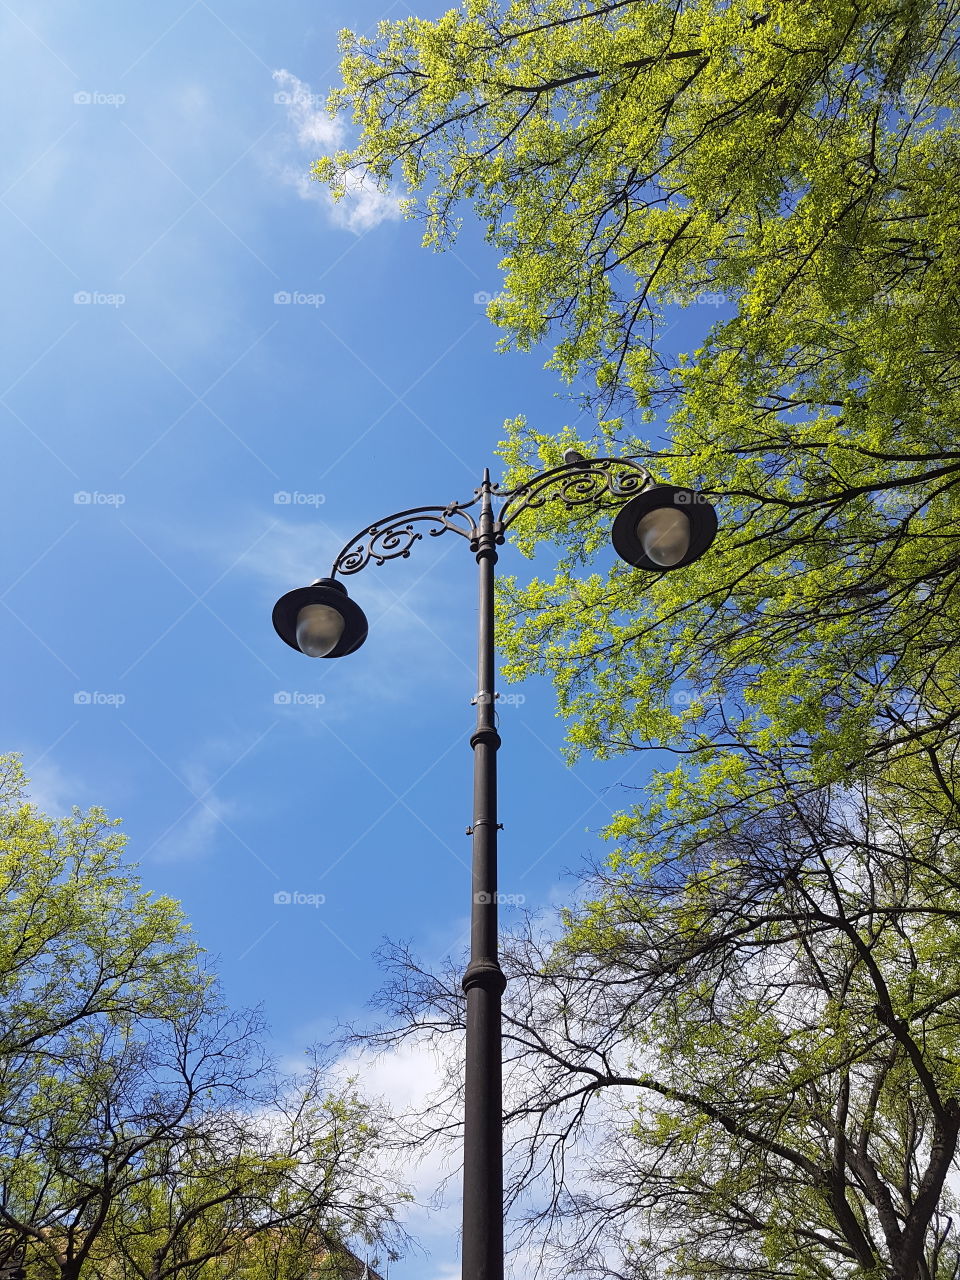 lampost in the city center, surrounded with trees